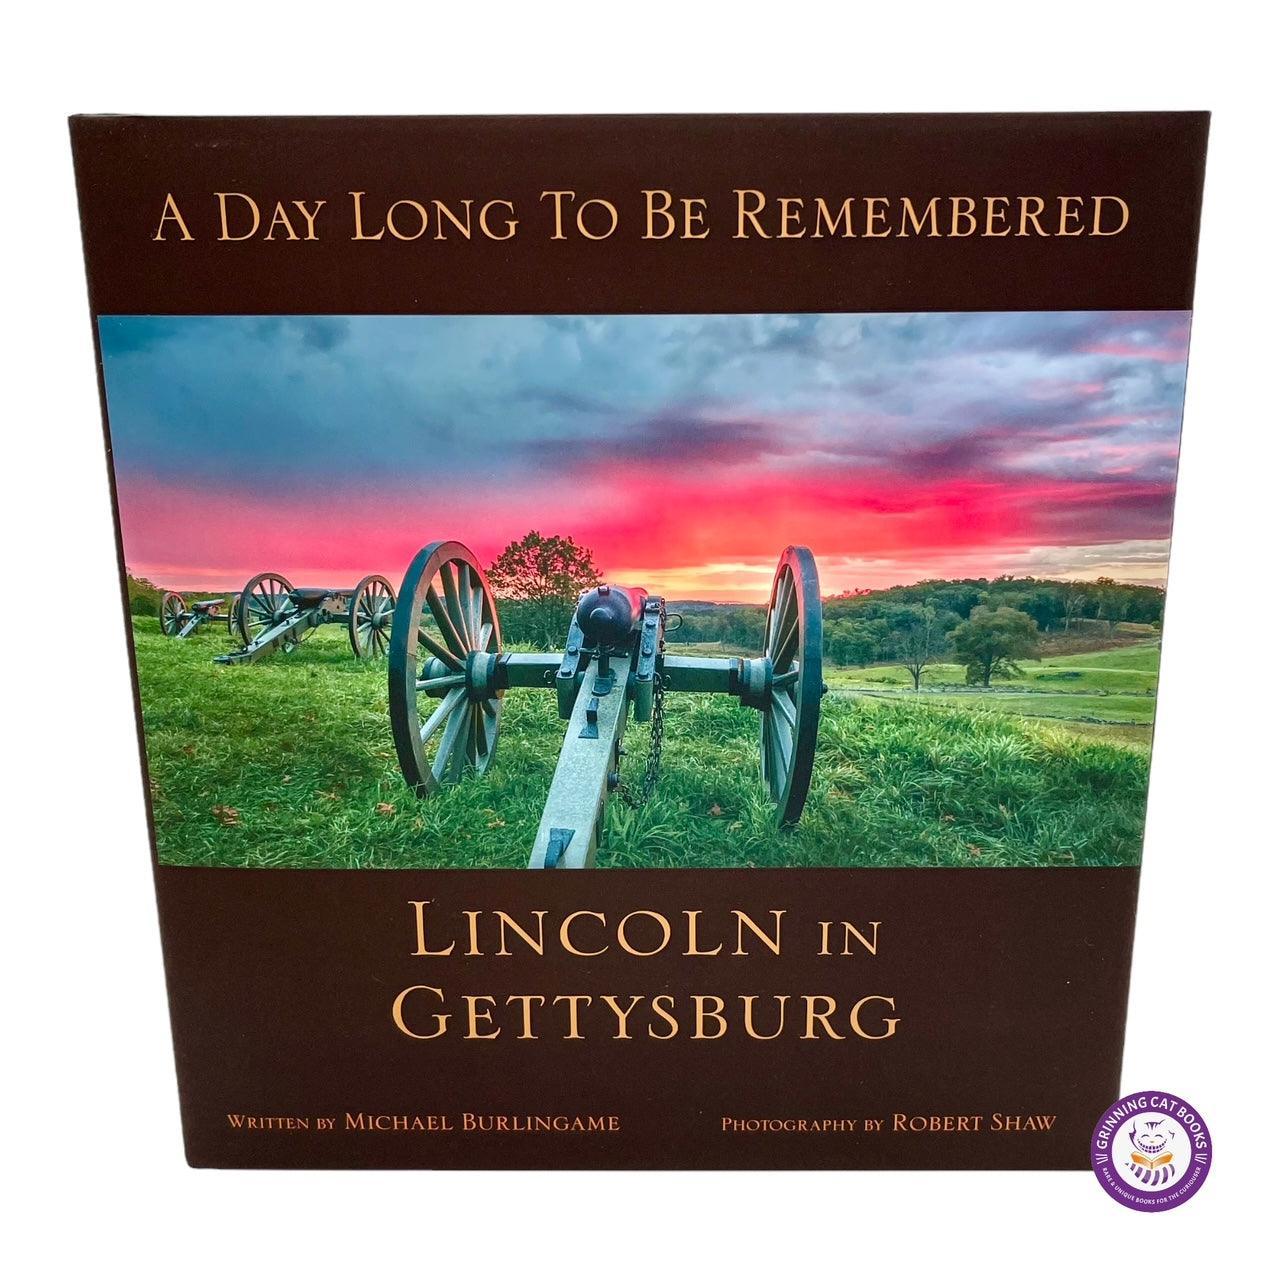 A Day Long to be Remembered: Lincoln at Gettysburg (signed) - Grinning Cat Books - AMERICANA - AMERICAN MILITARY, CIVIL WAR, LINCOLN, MILITARY